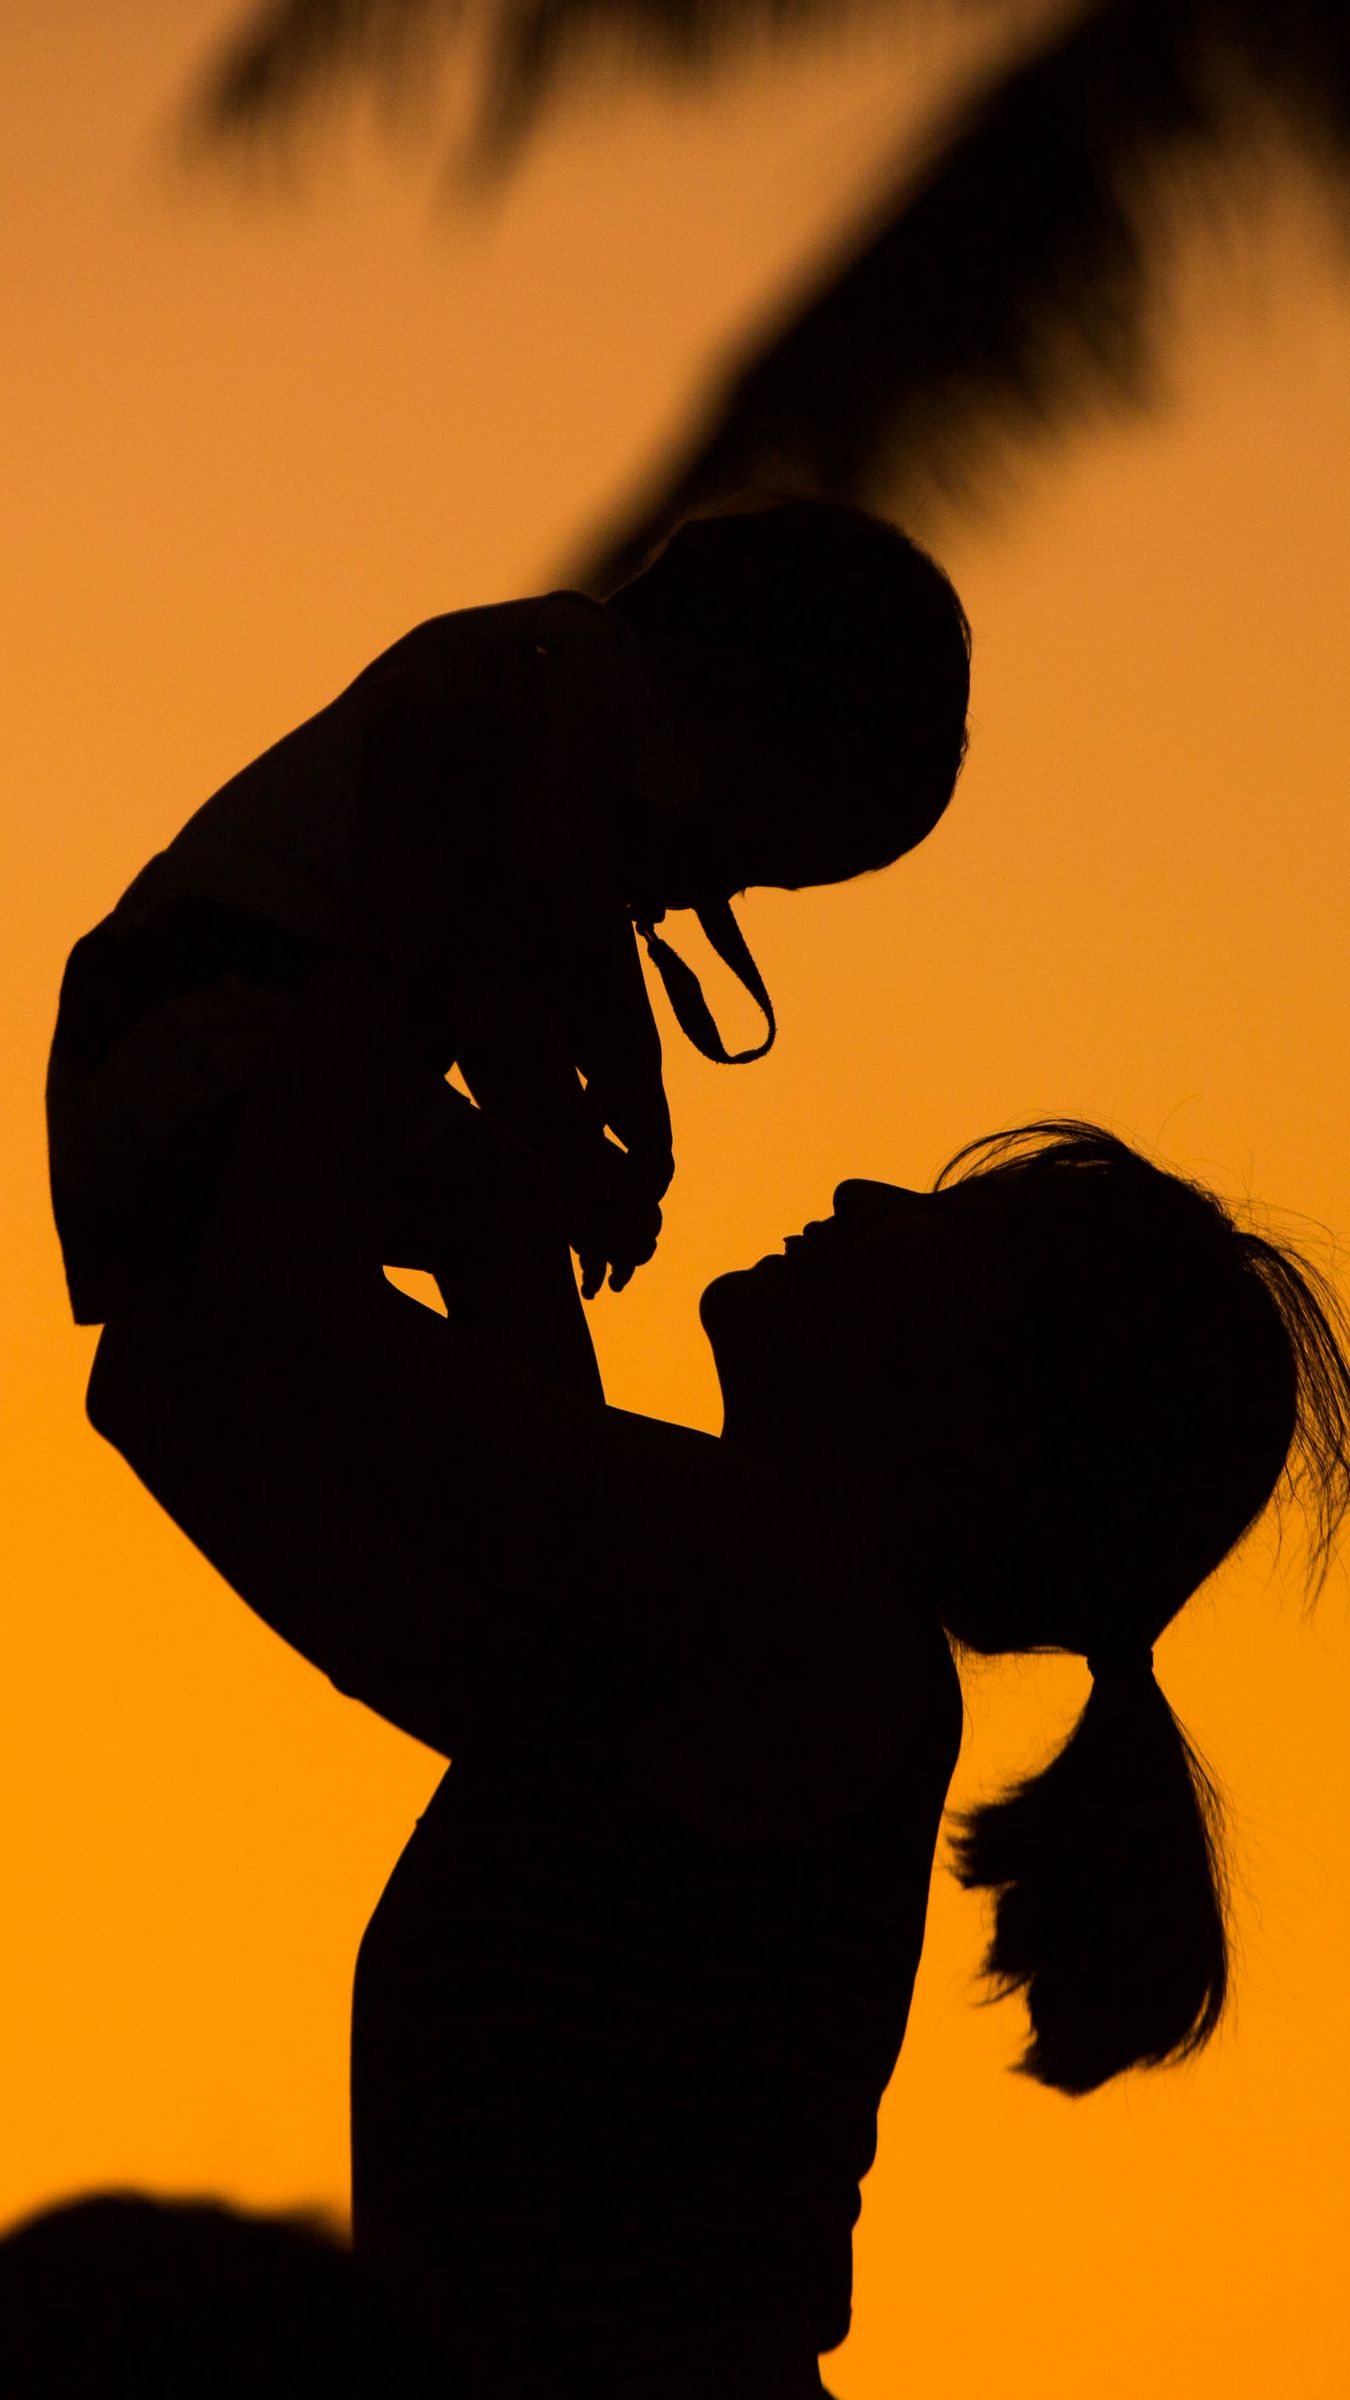 Download wallpaper 1350x2400 silhouettes, mother, child, sunset iphone 8+/7+/6s+/for parallax HD background